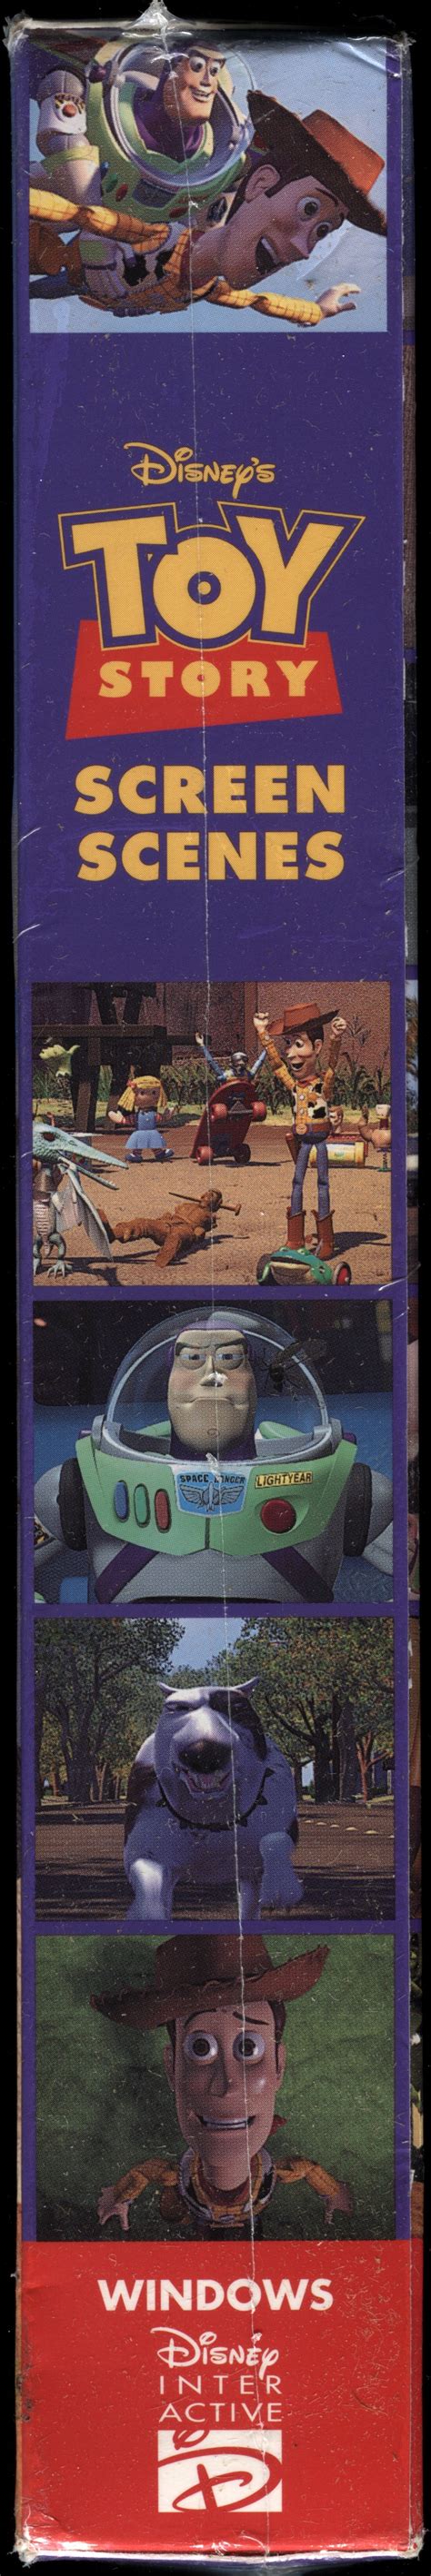 Toy Story Screen Scenes 1995 Disney Interactive Free Download